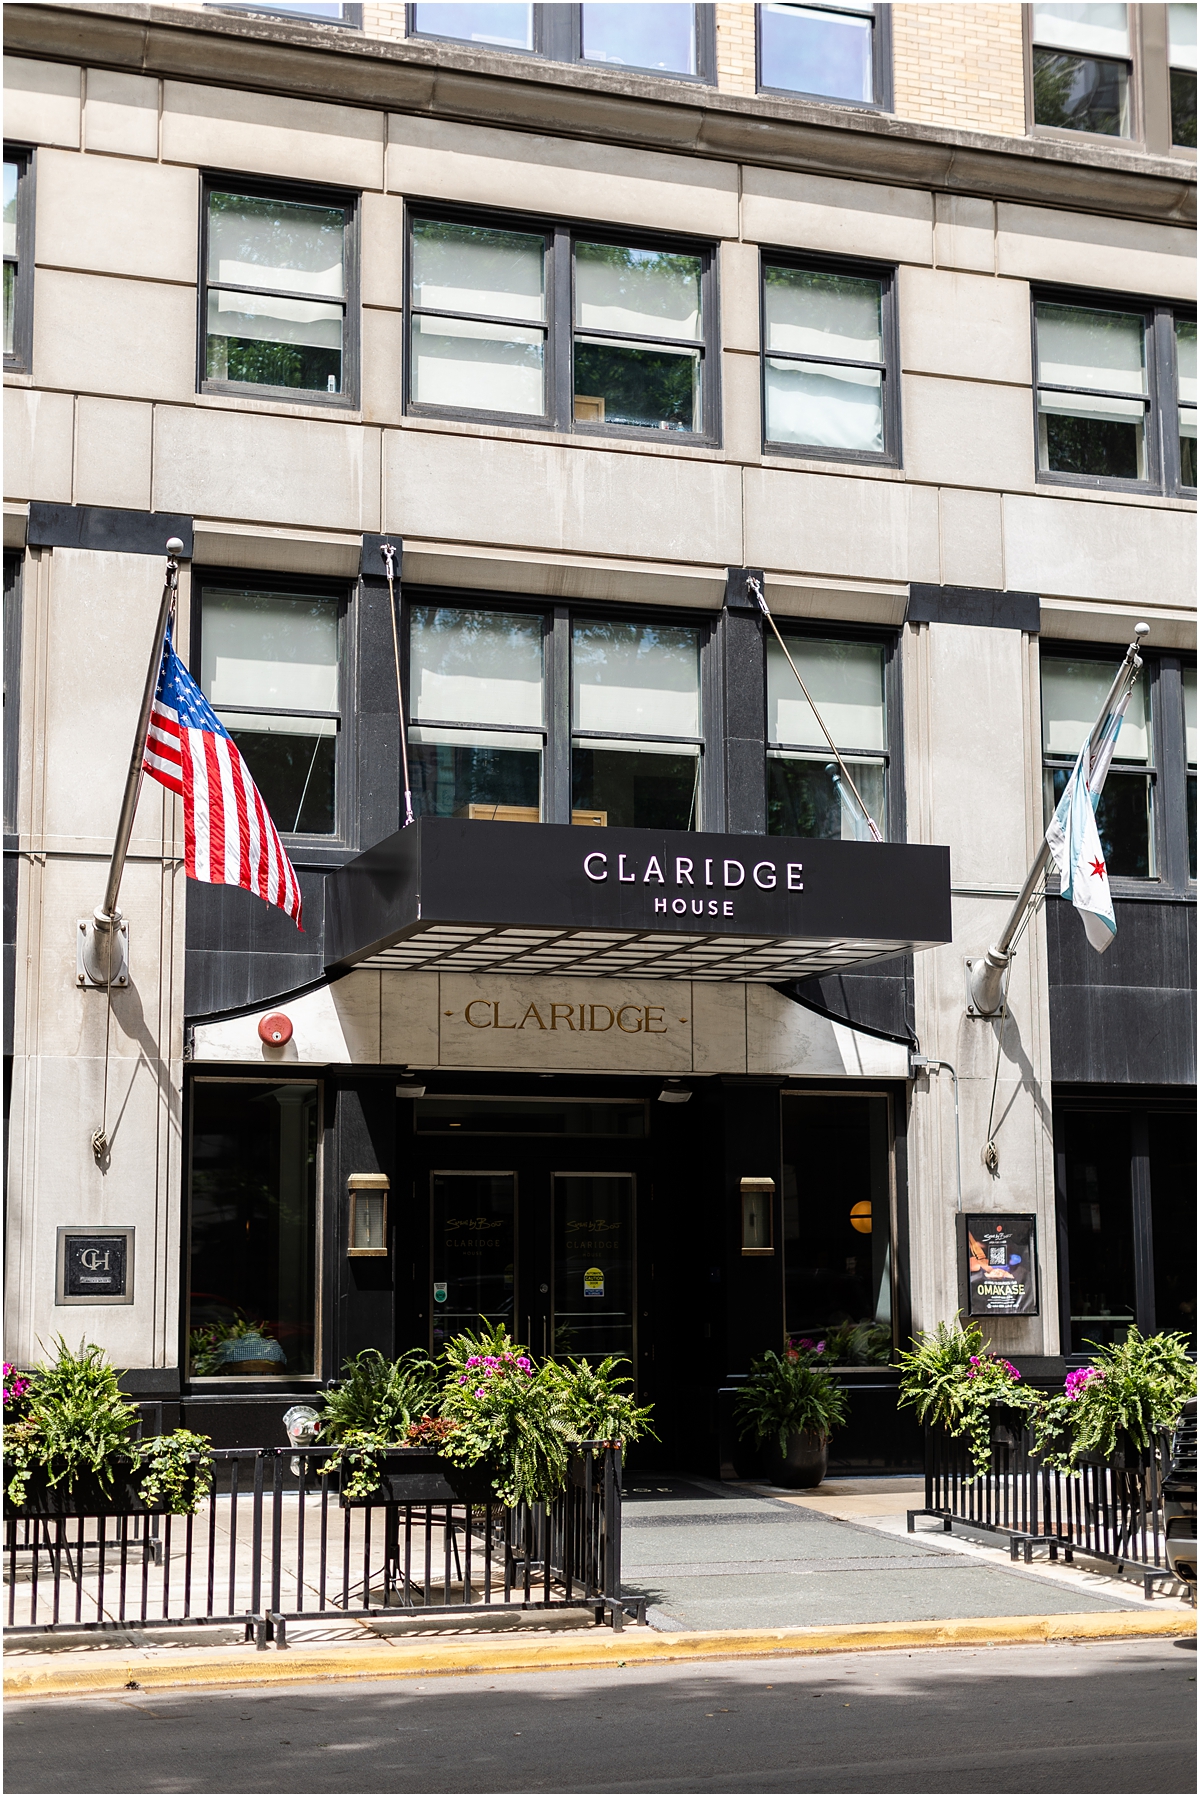 Claridge House, luxurious boutique hotel in Chicago